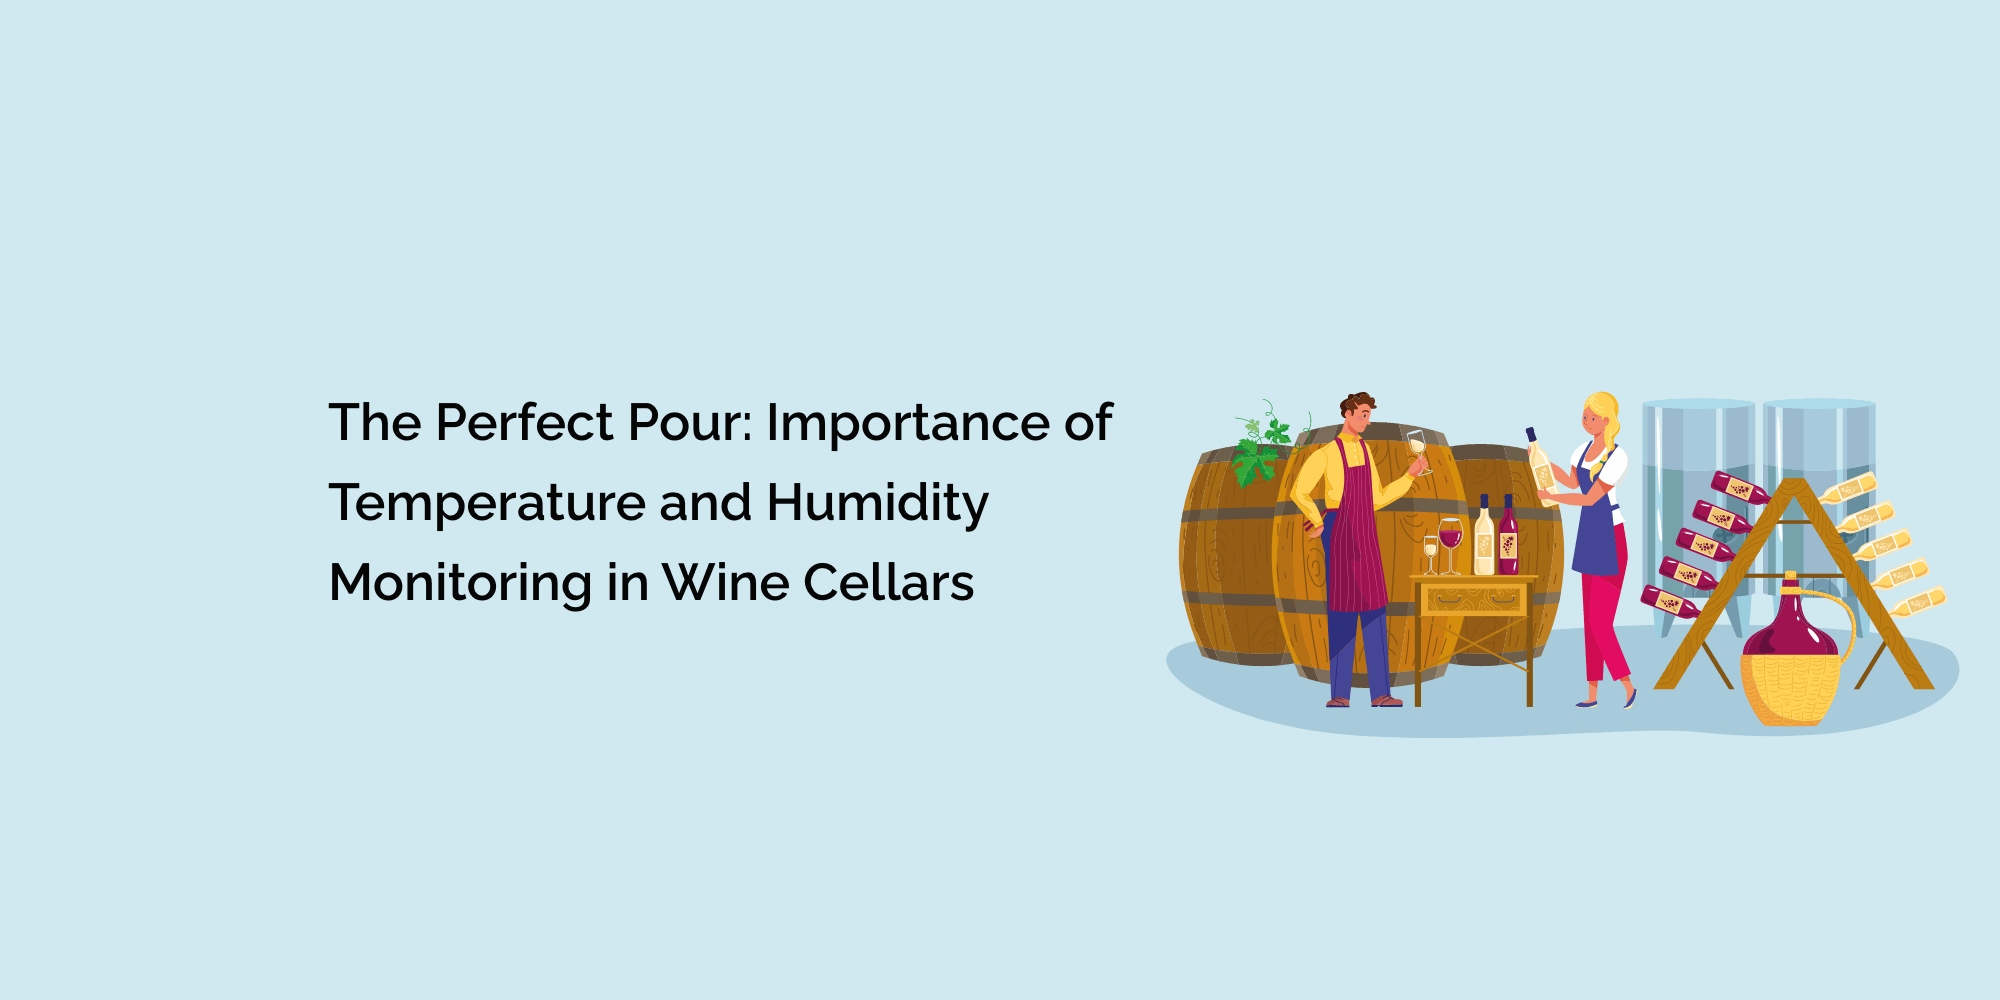 The Perfect Pour: Importance of Temperature and Humidity Monitoring in Wine Cellars